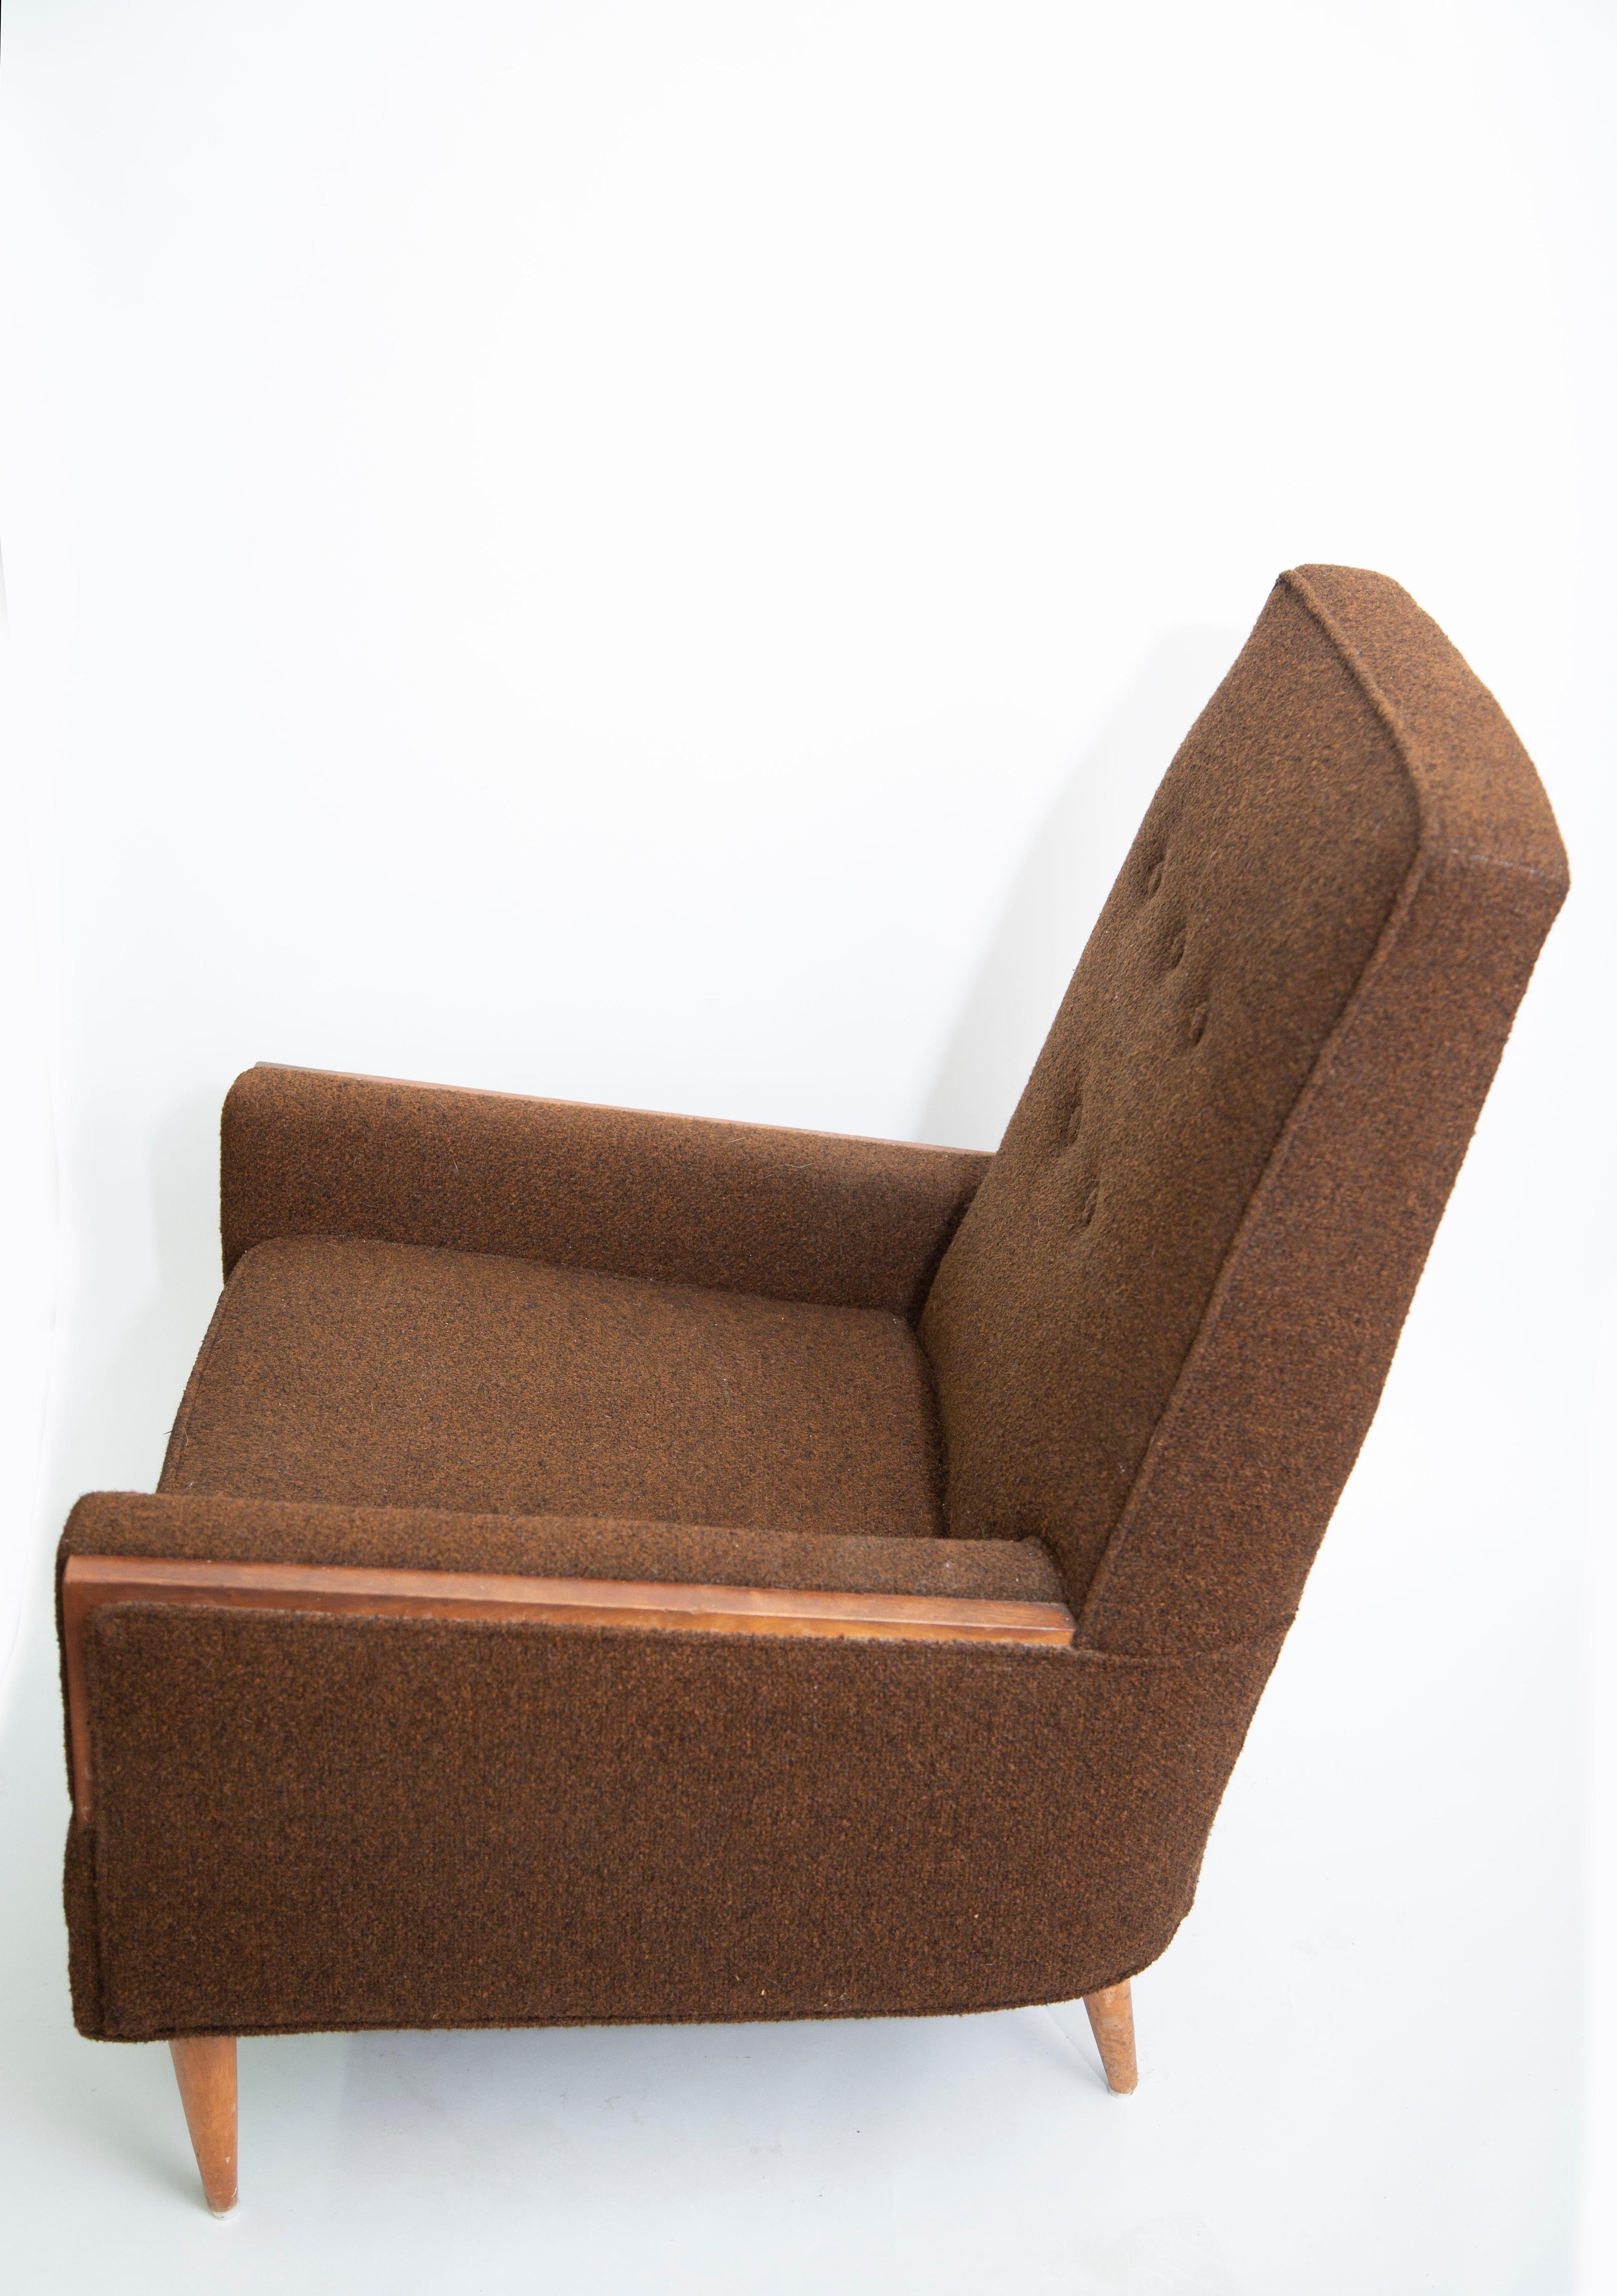 Mid Century Modern Wood Trim Lounge Chair, 1969, USA In Good Condition For Sale In Miami, FL